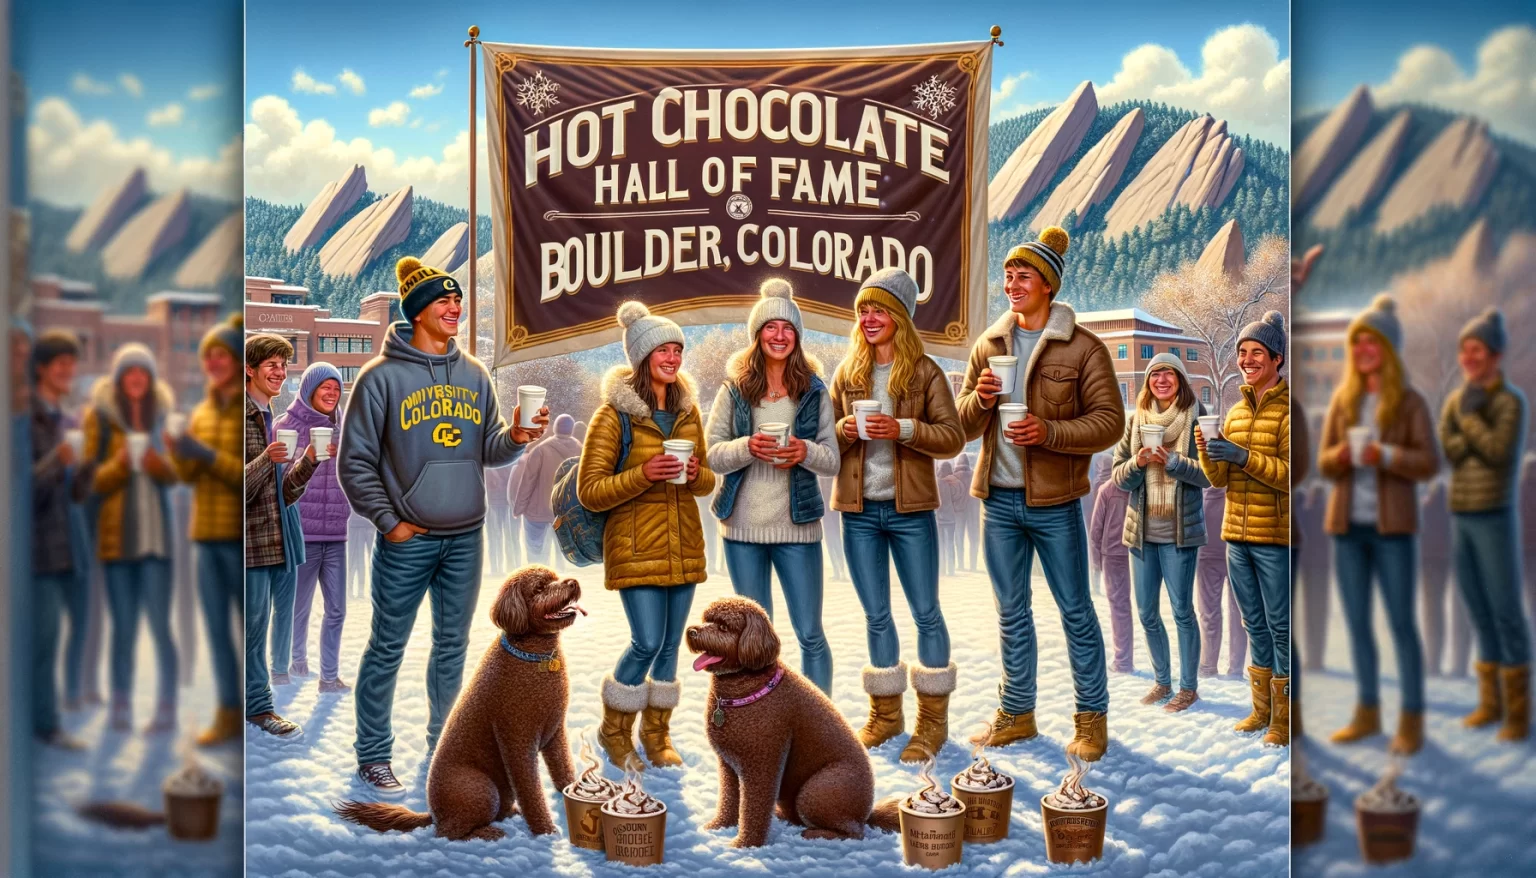 Boulder’s Hot Chocolate Hall of Fame: Indulge in Decadent Delights